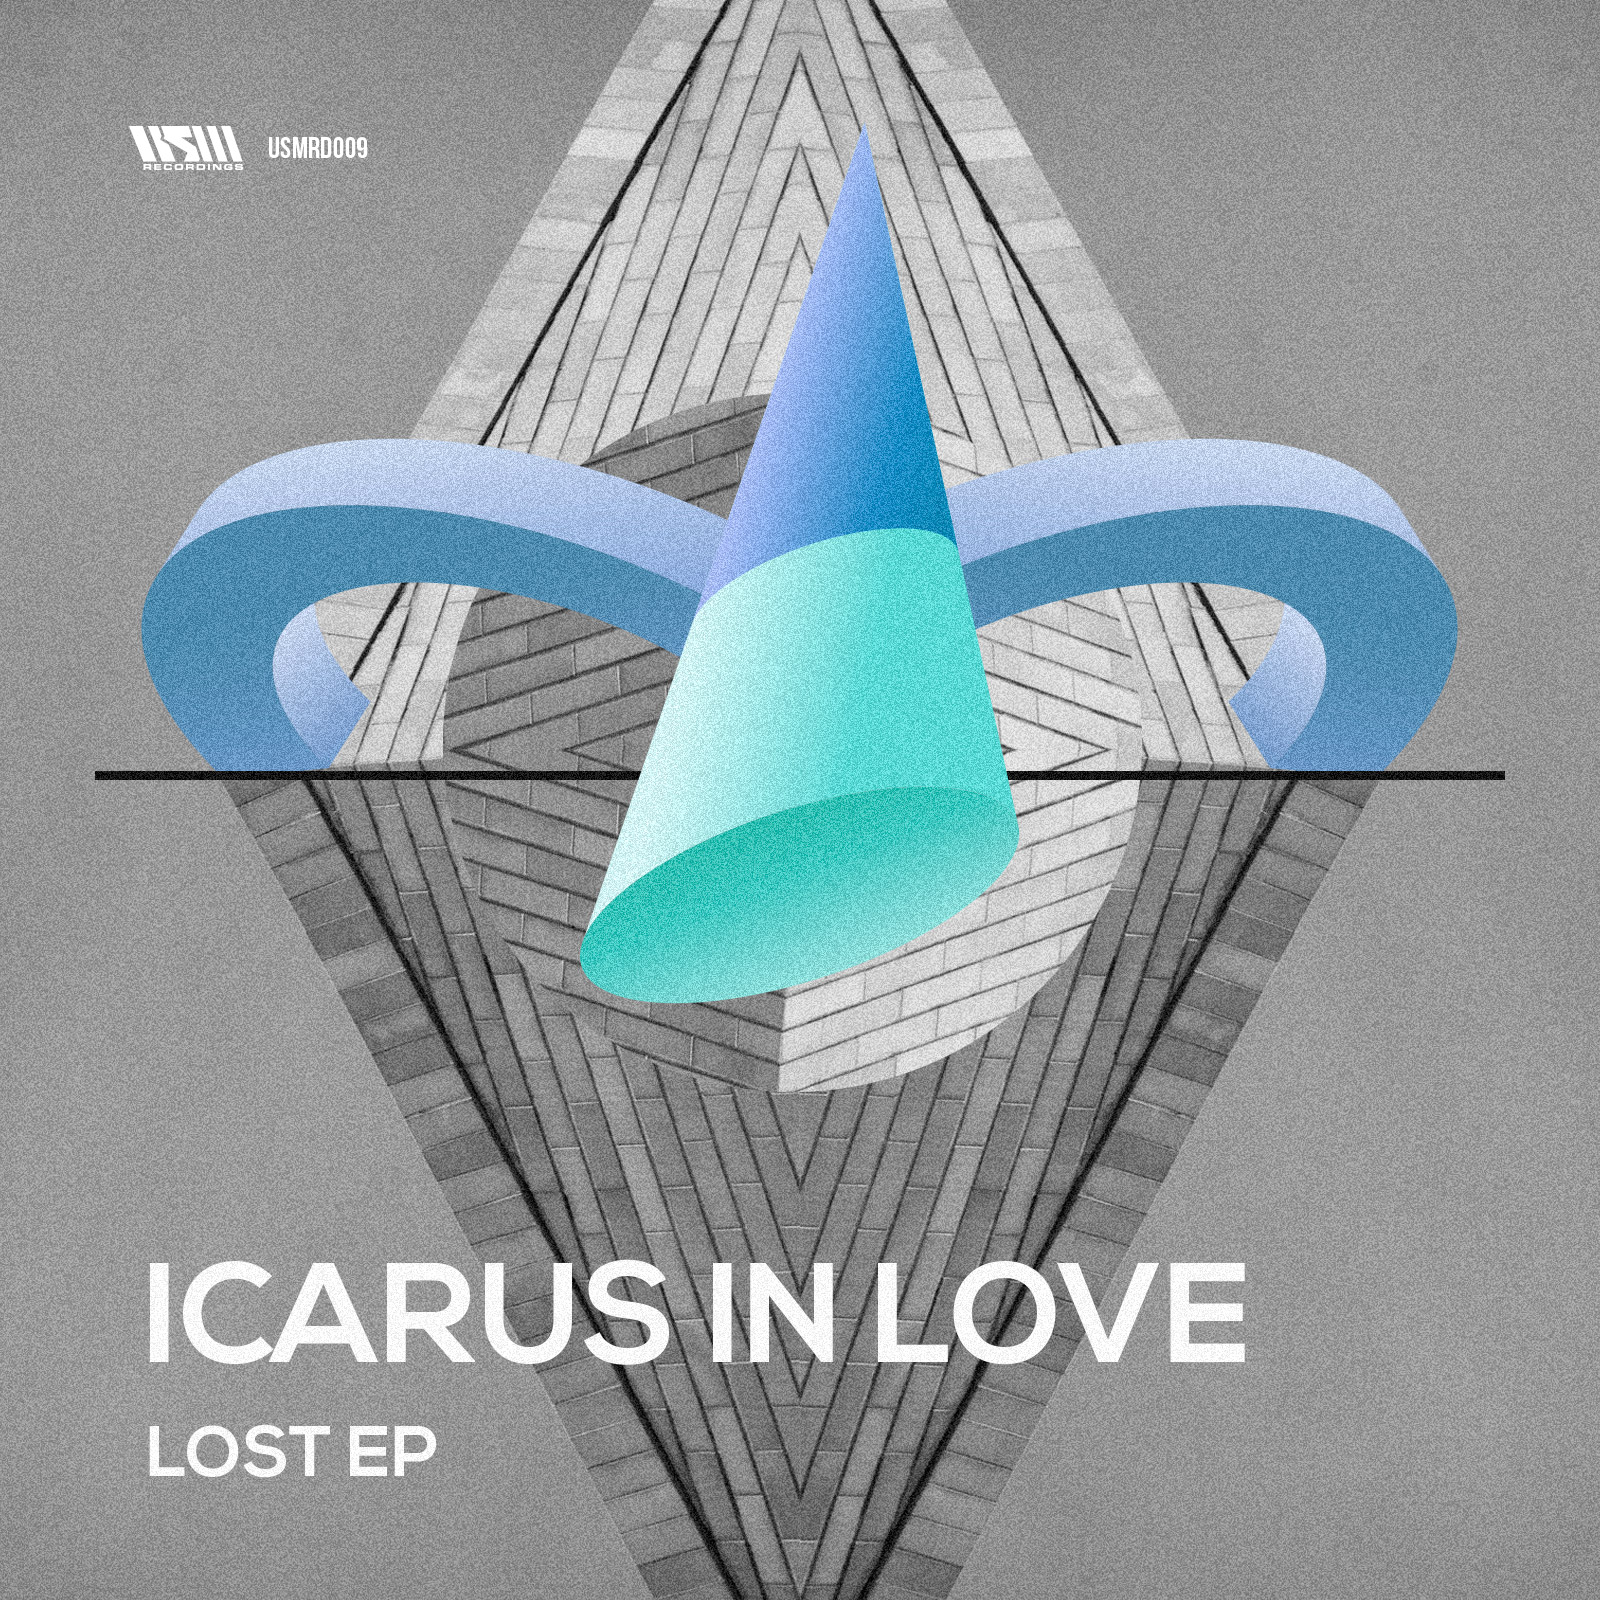 Icarus in love - Lost EP